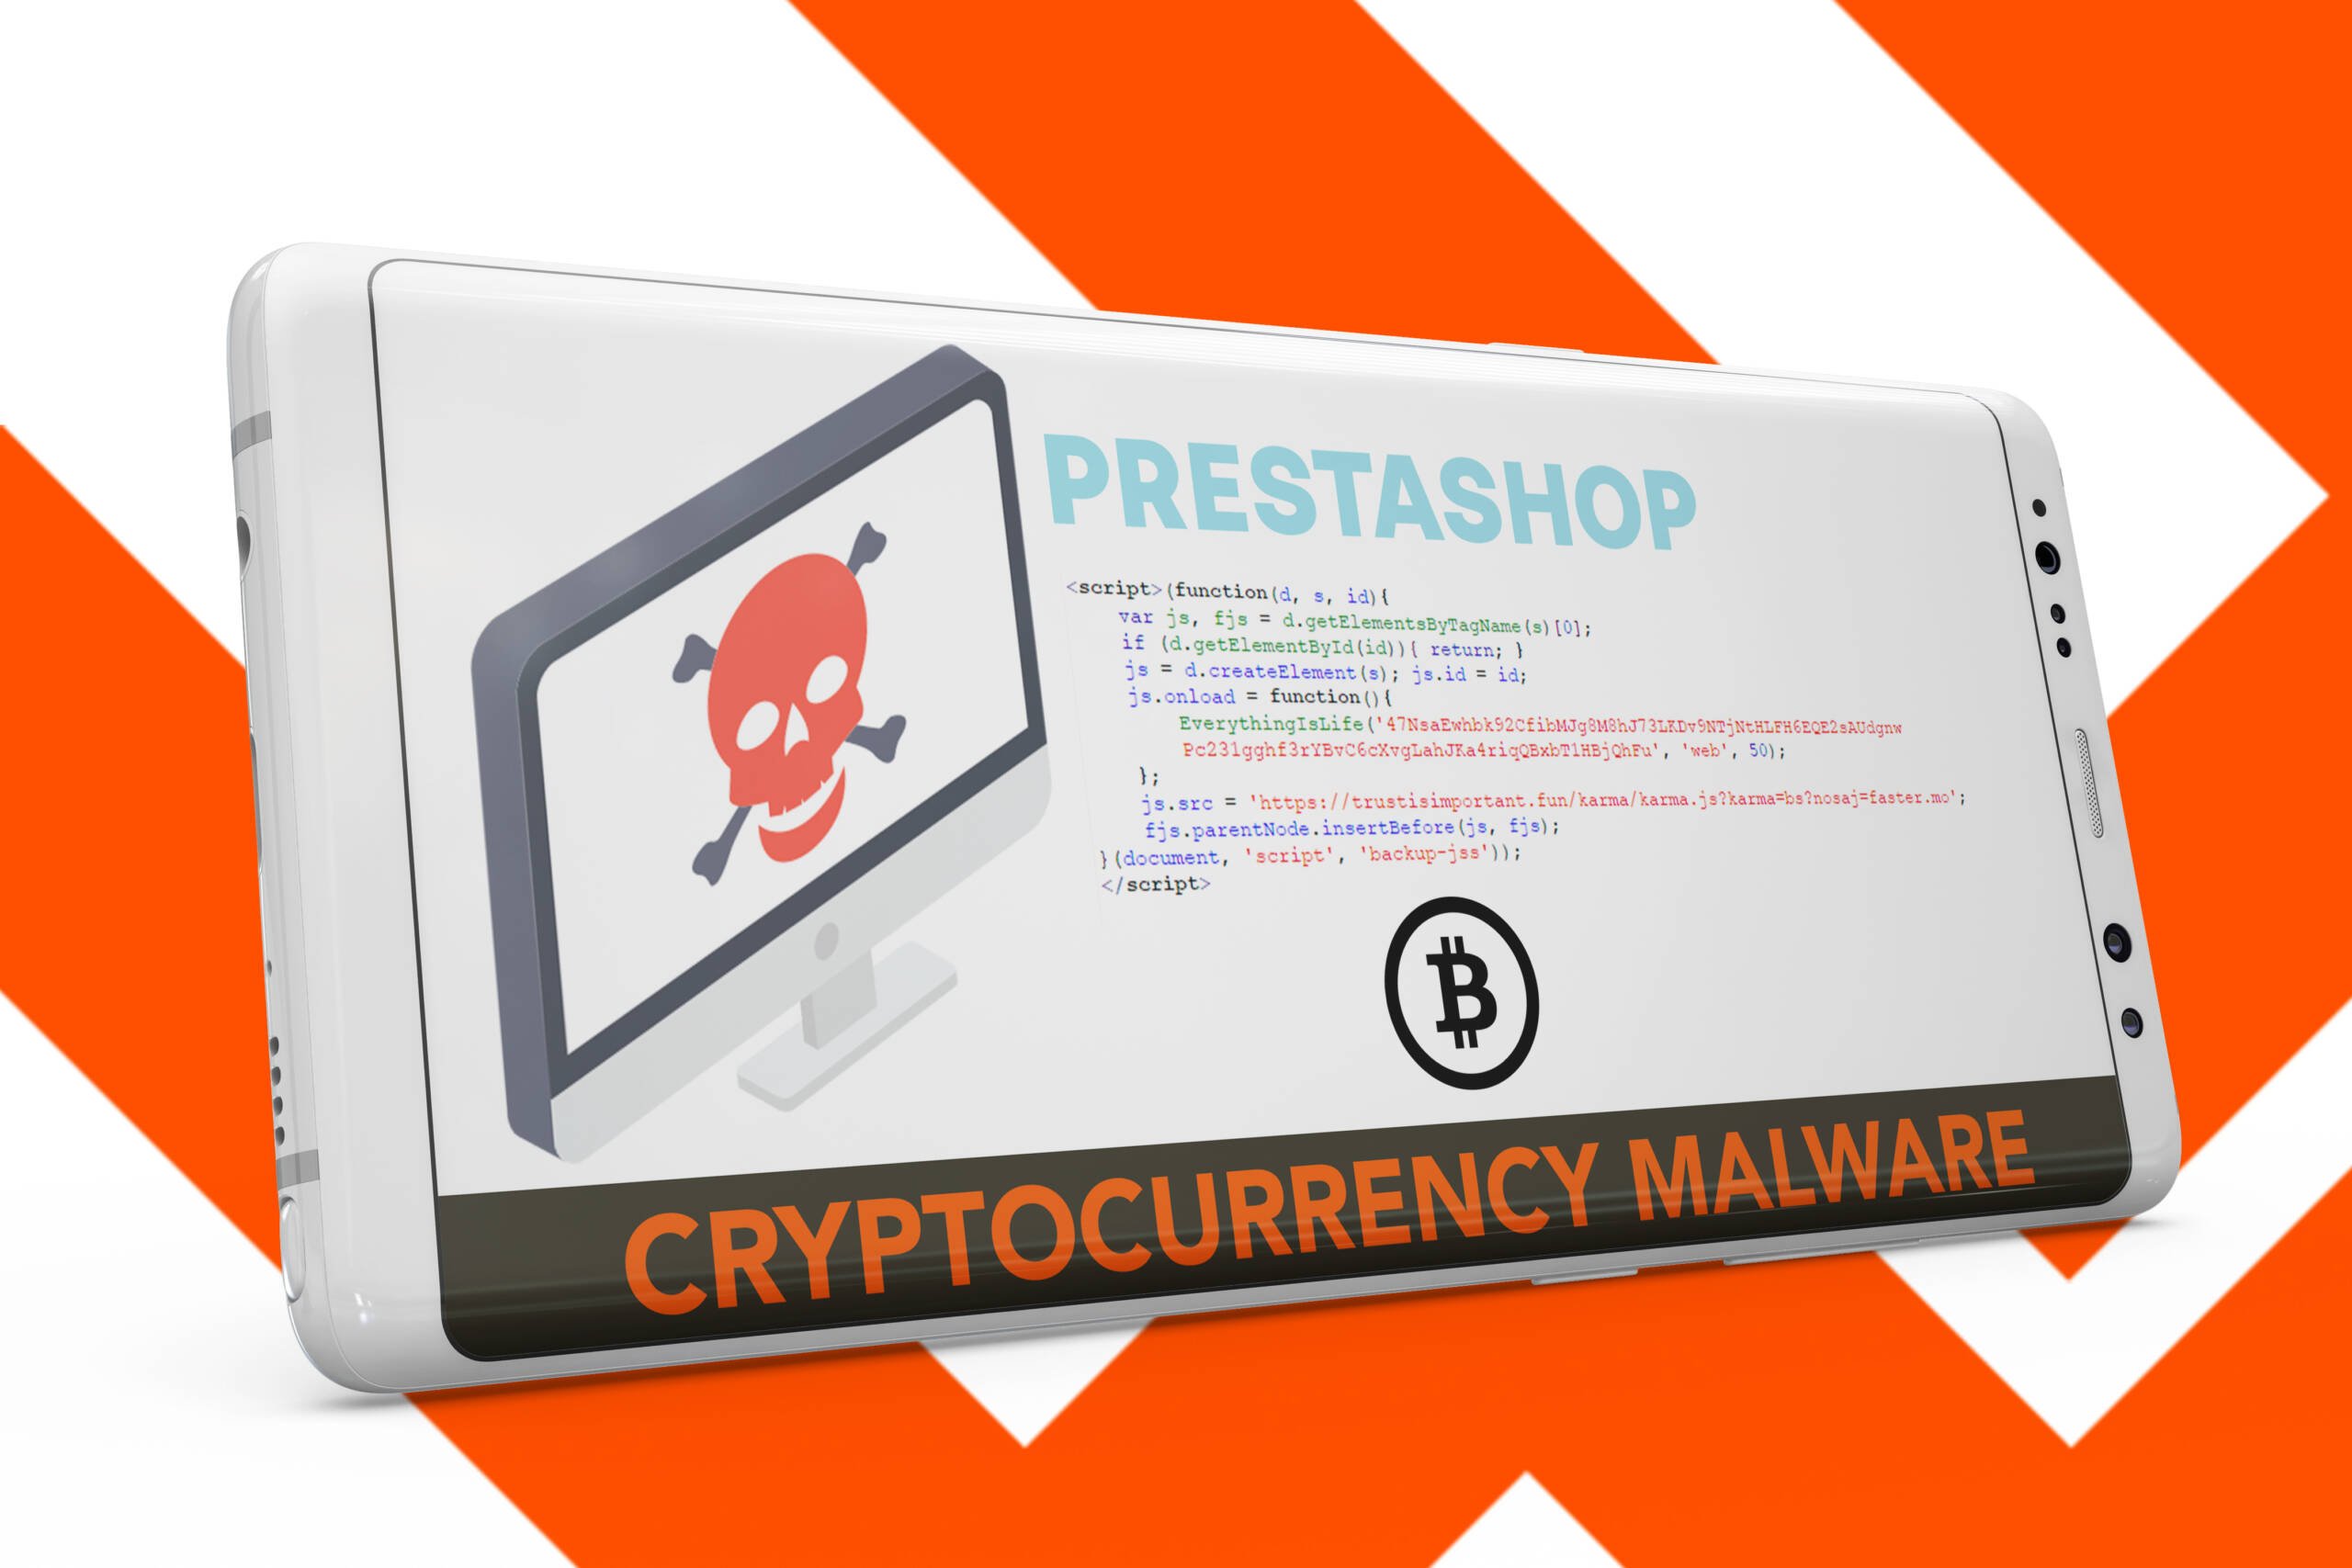 Cryptocurrency malware. Malicious code to mine cryptocurrencies. PrestaShop Malware. PrestaShop infection. PrestaShop Virus. PrestaShop cryptocurrencies. Malware online stores.